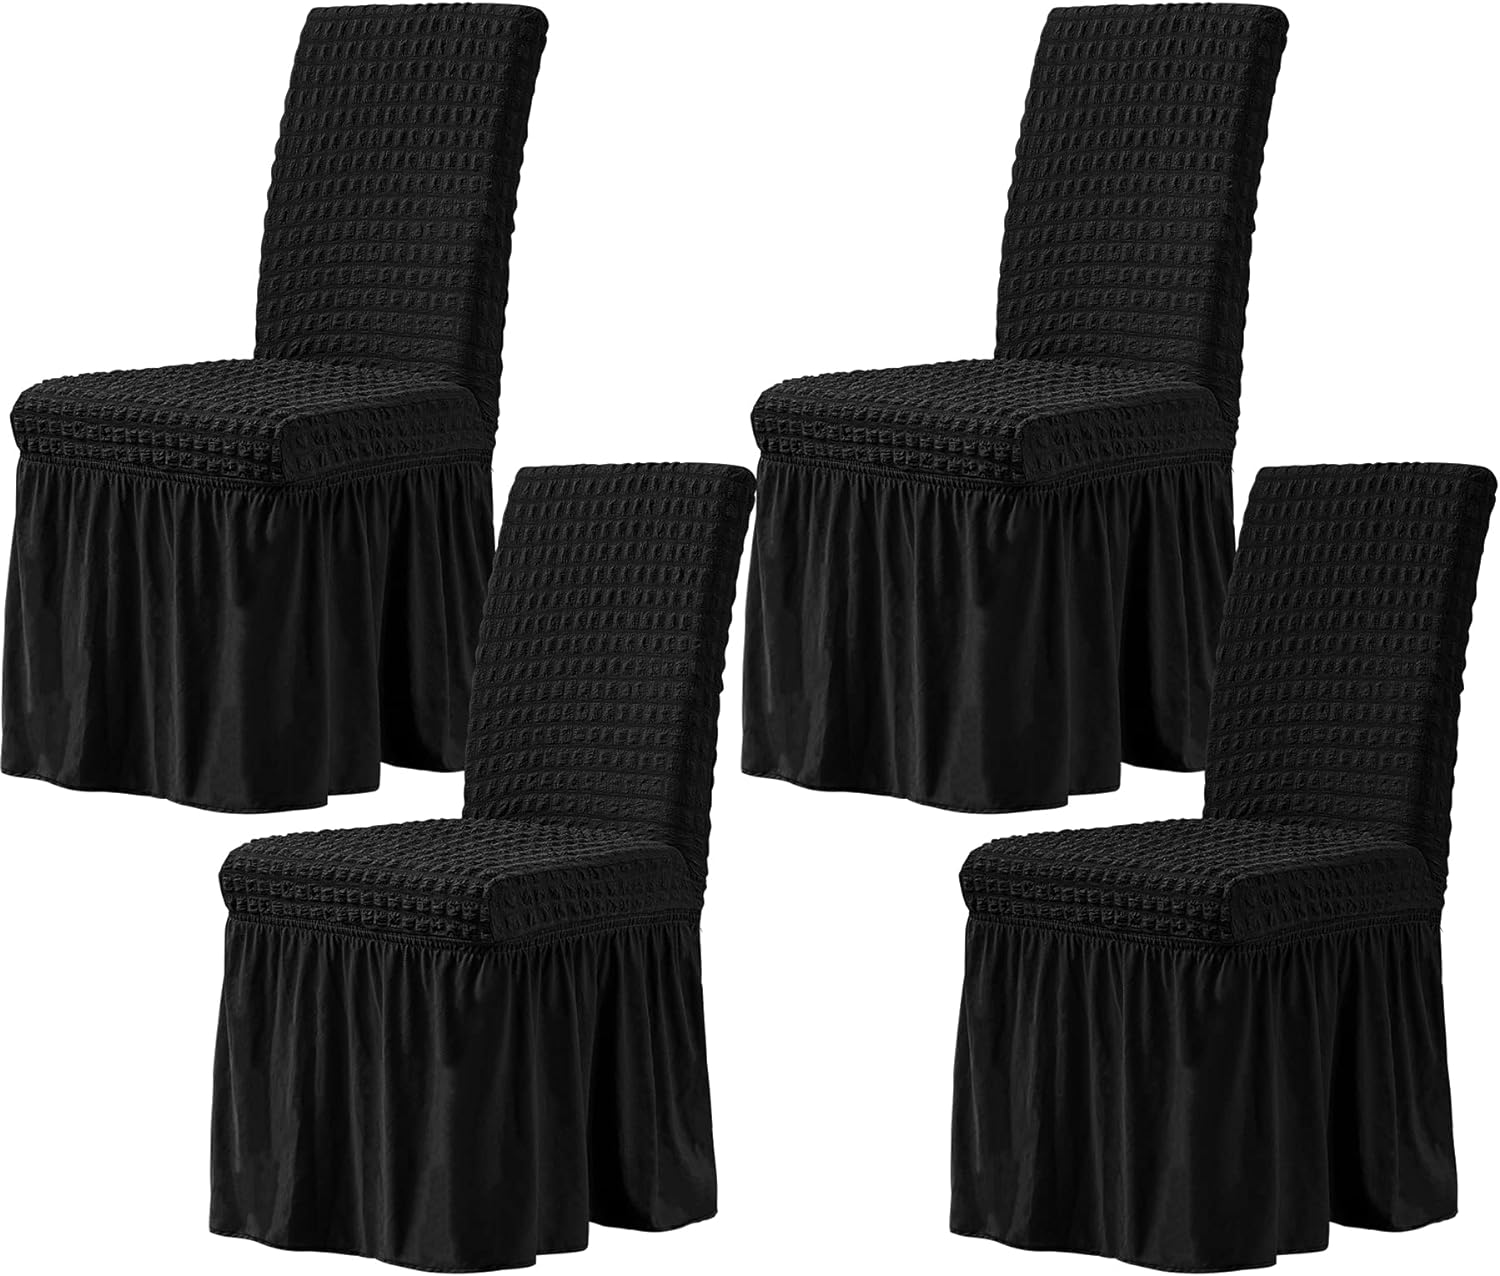 CHUN YI Dining Chair Covers Set of 4, Universal Stretch Dining Room Chair Covers with Skirt, Removable Parsons Chair Slipcover for Kitchen Wedding Party Banquet (Black)